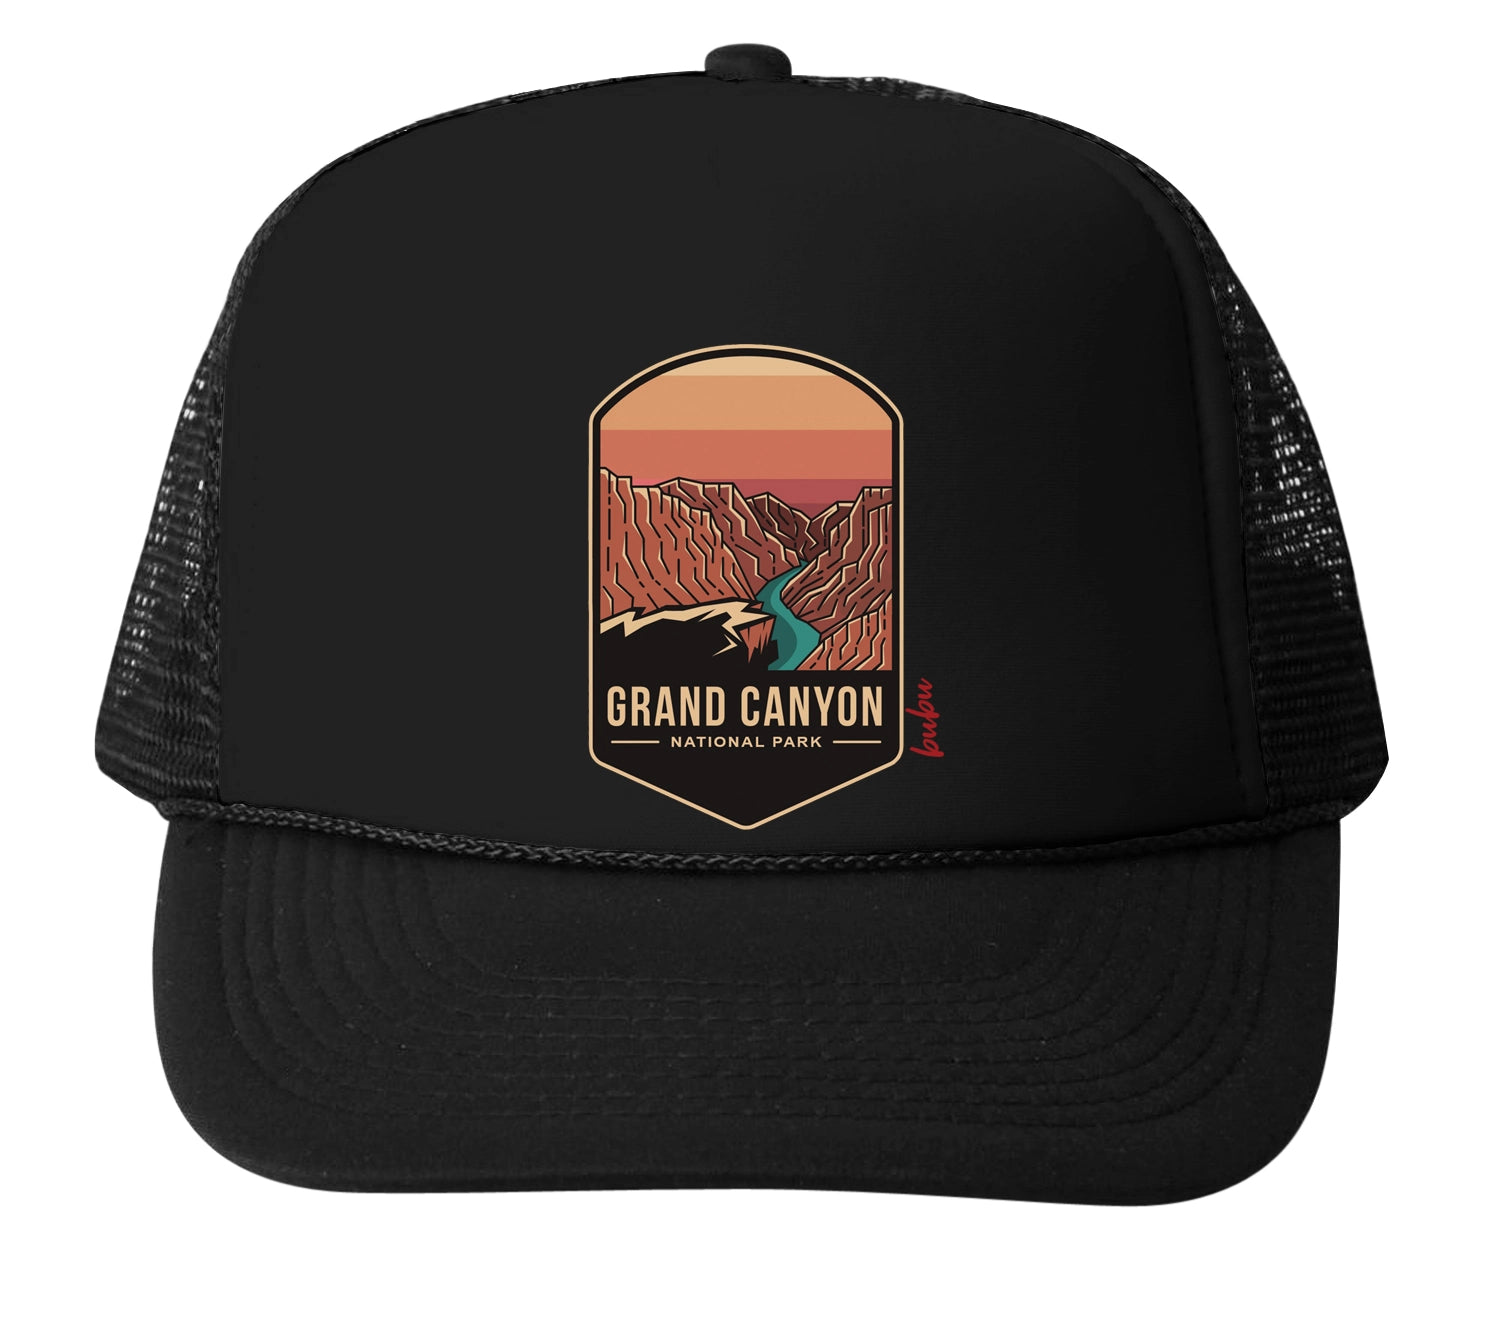 National Park - Grand Canyon Trucker Hat